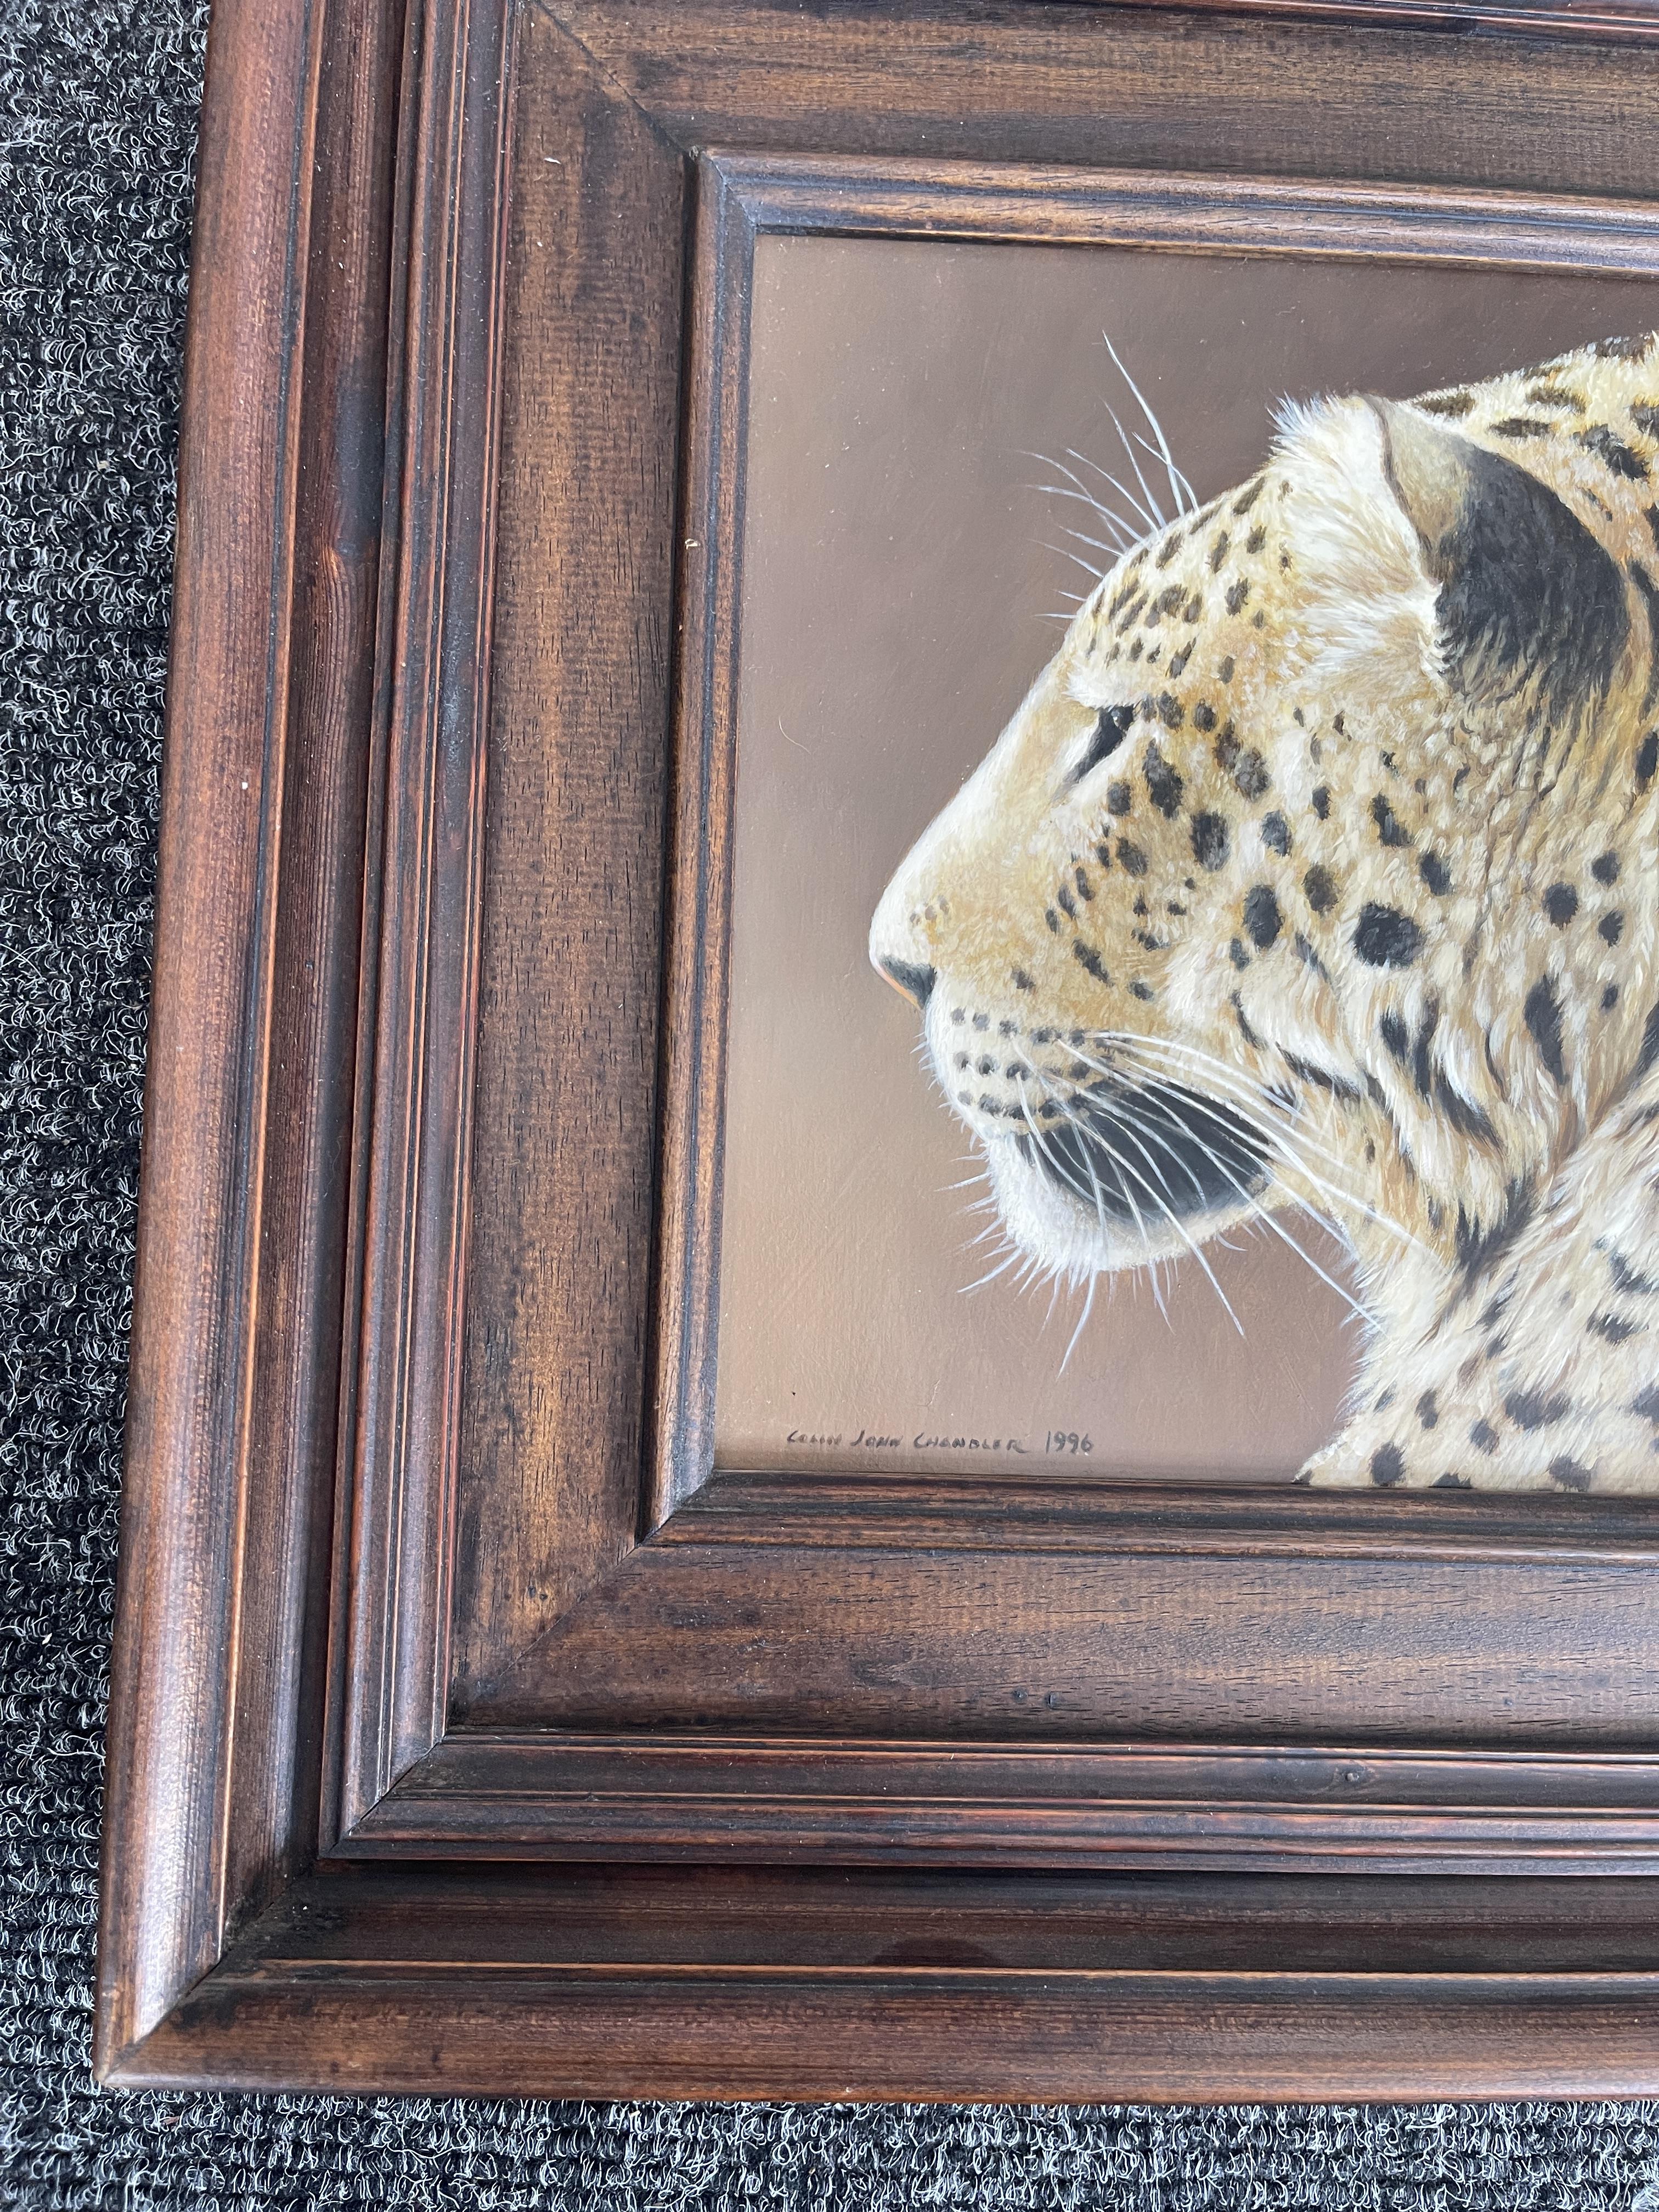 Signed and Framed Oil On Panel - Leopard - by Coli - Image 10 of 22